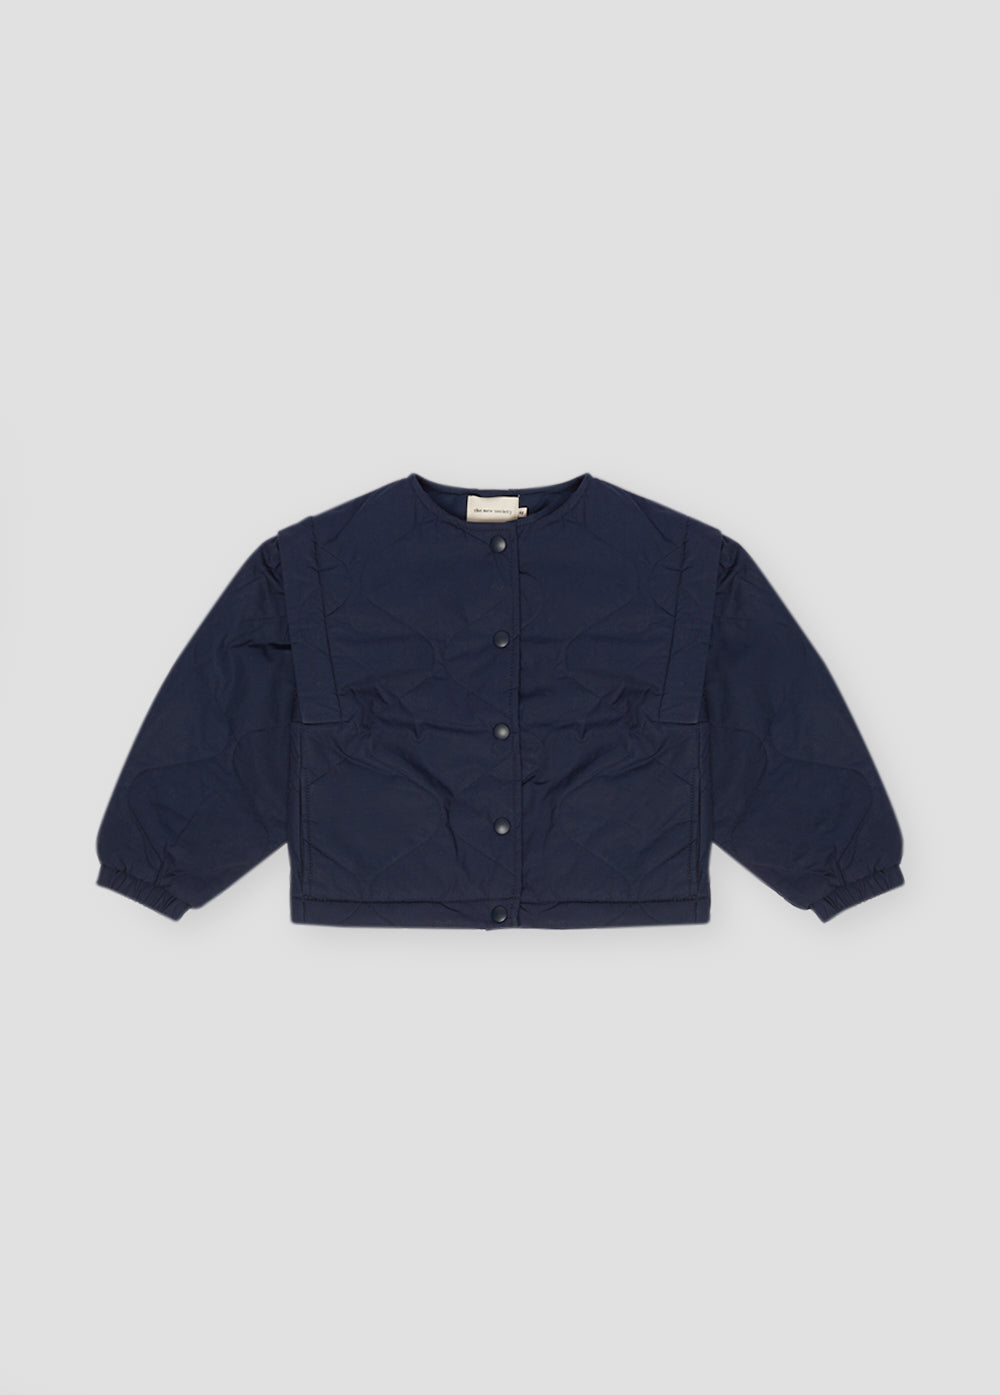 The New Society Colette Jacket - Navy- 4Y, 6Y